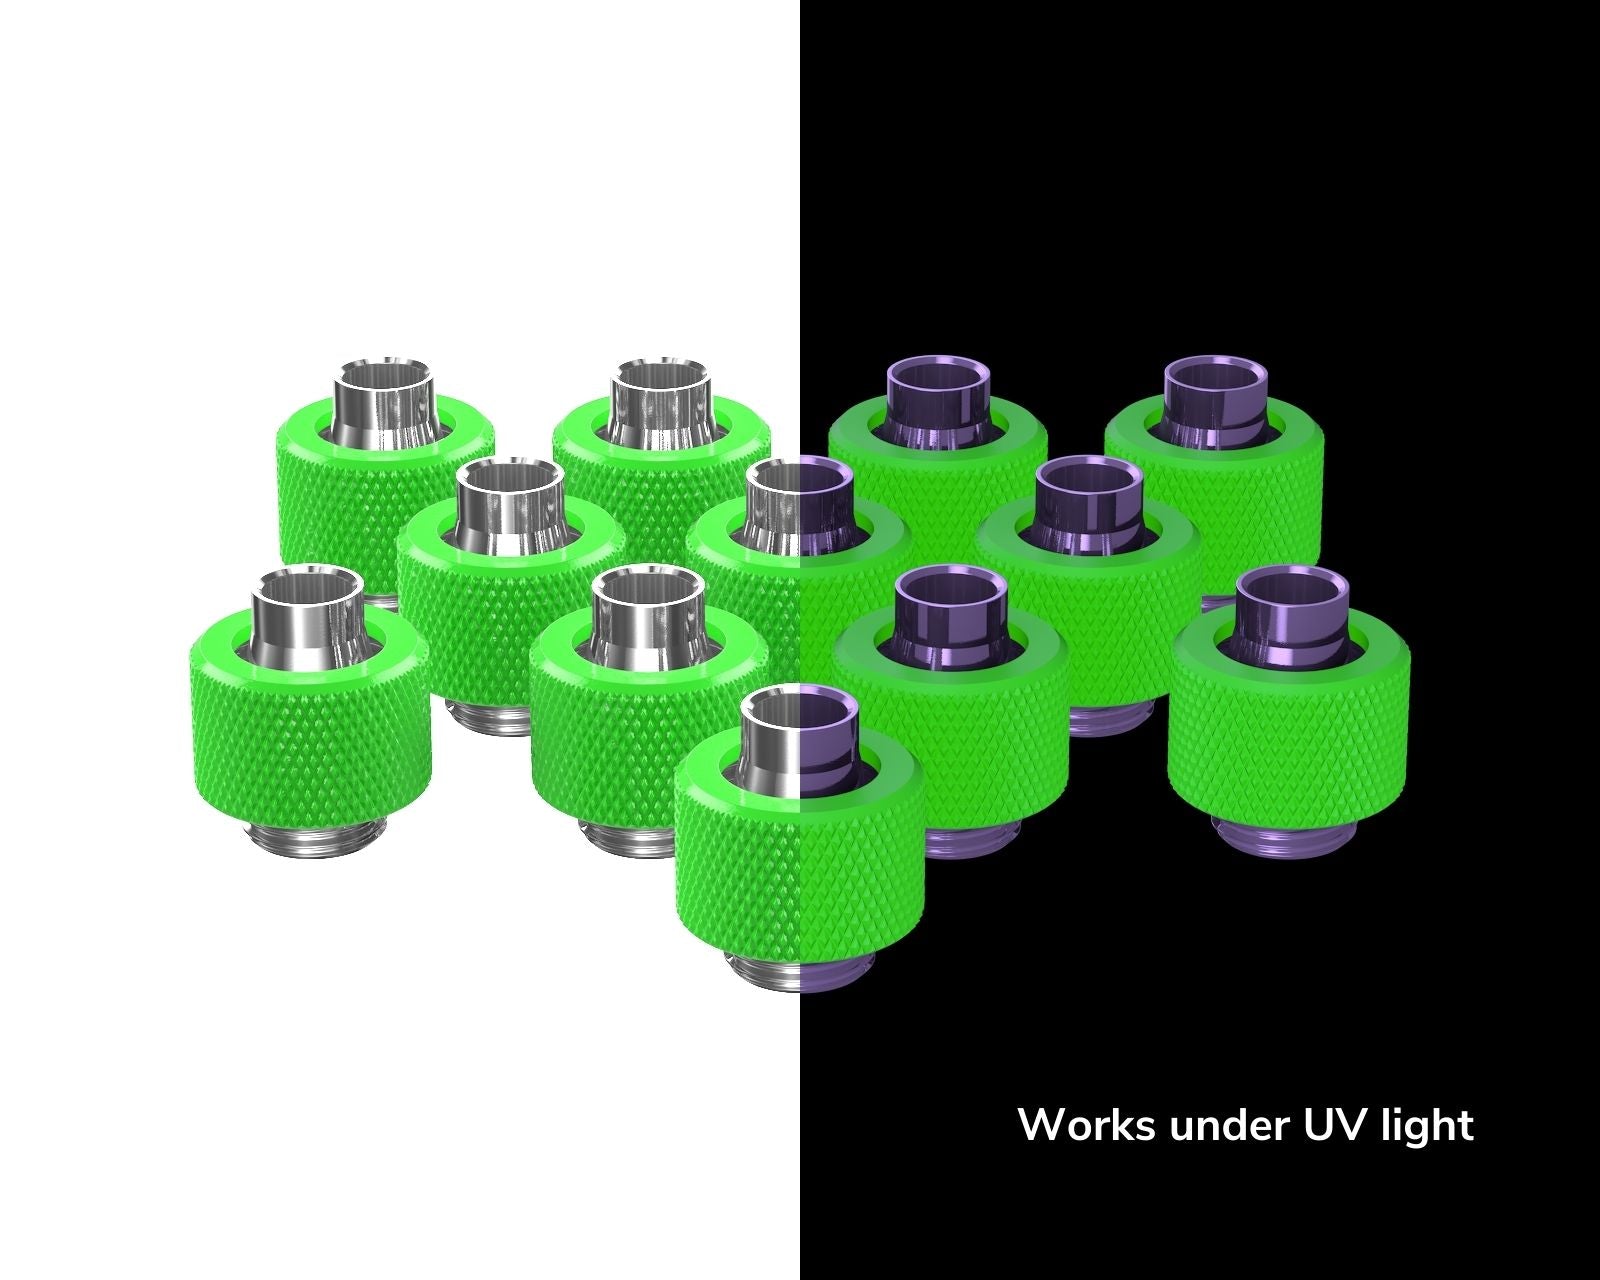 PrimoChill SecureFit SX - Premium Compression Fitting For 3/8in ID x 1/2in OD Flexible Tubing 12 Pack (F-SFSX12-12) - Available in 20+ Colors, Custom Watercooling Loop Ready - UV Green